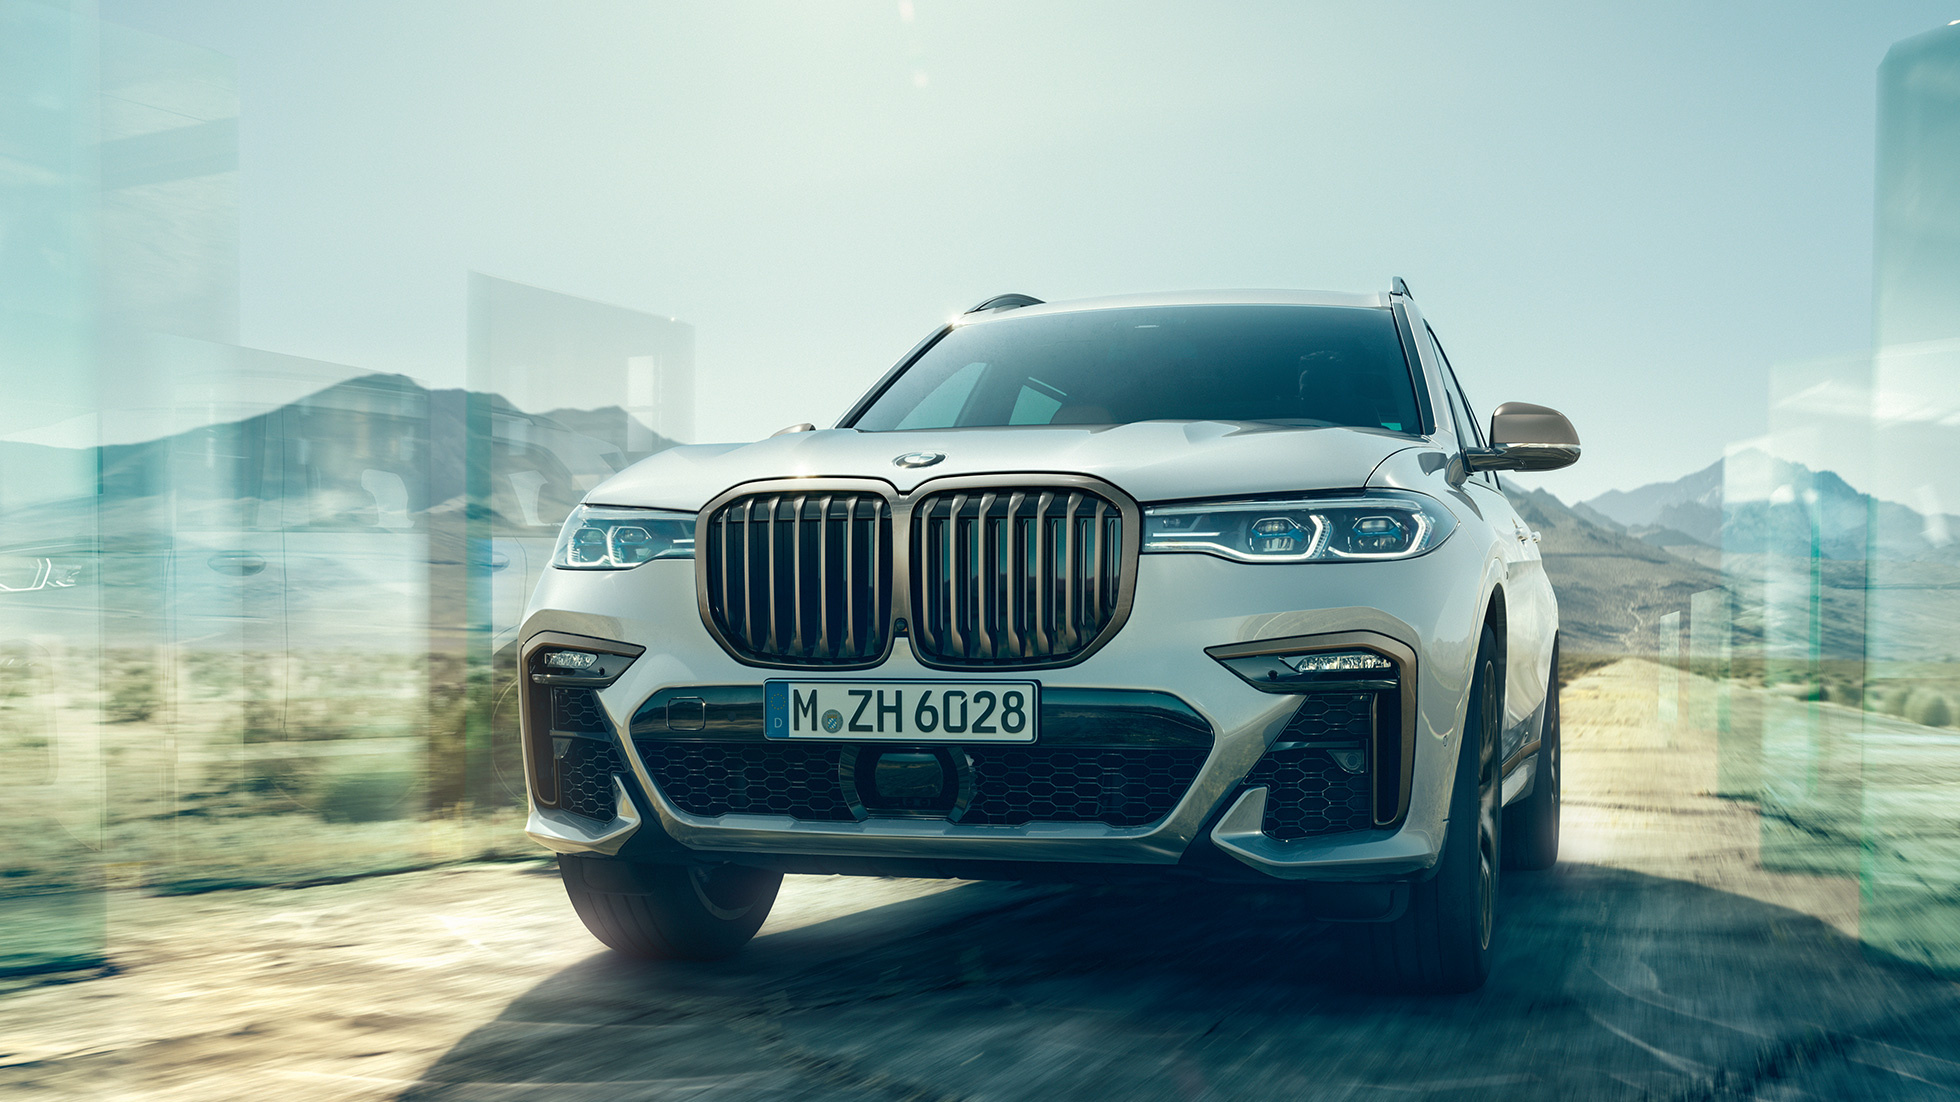 BMW X7, M series overview, Unmatched performance, Thrilling driving experience, 1960x1110 HD Desktop